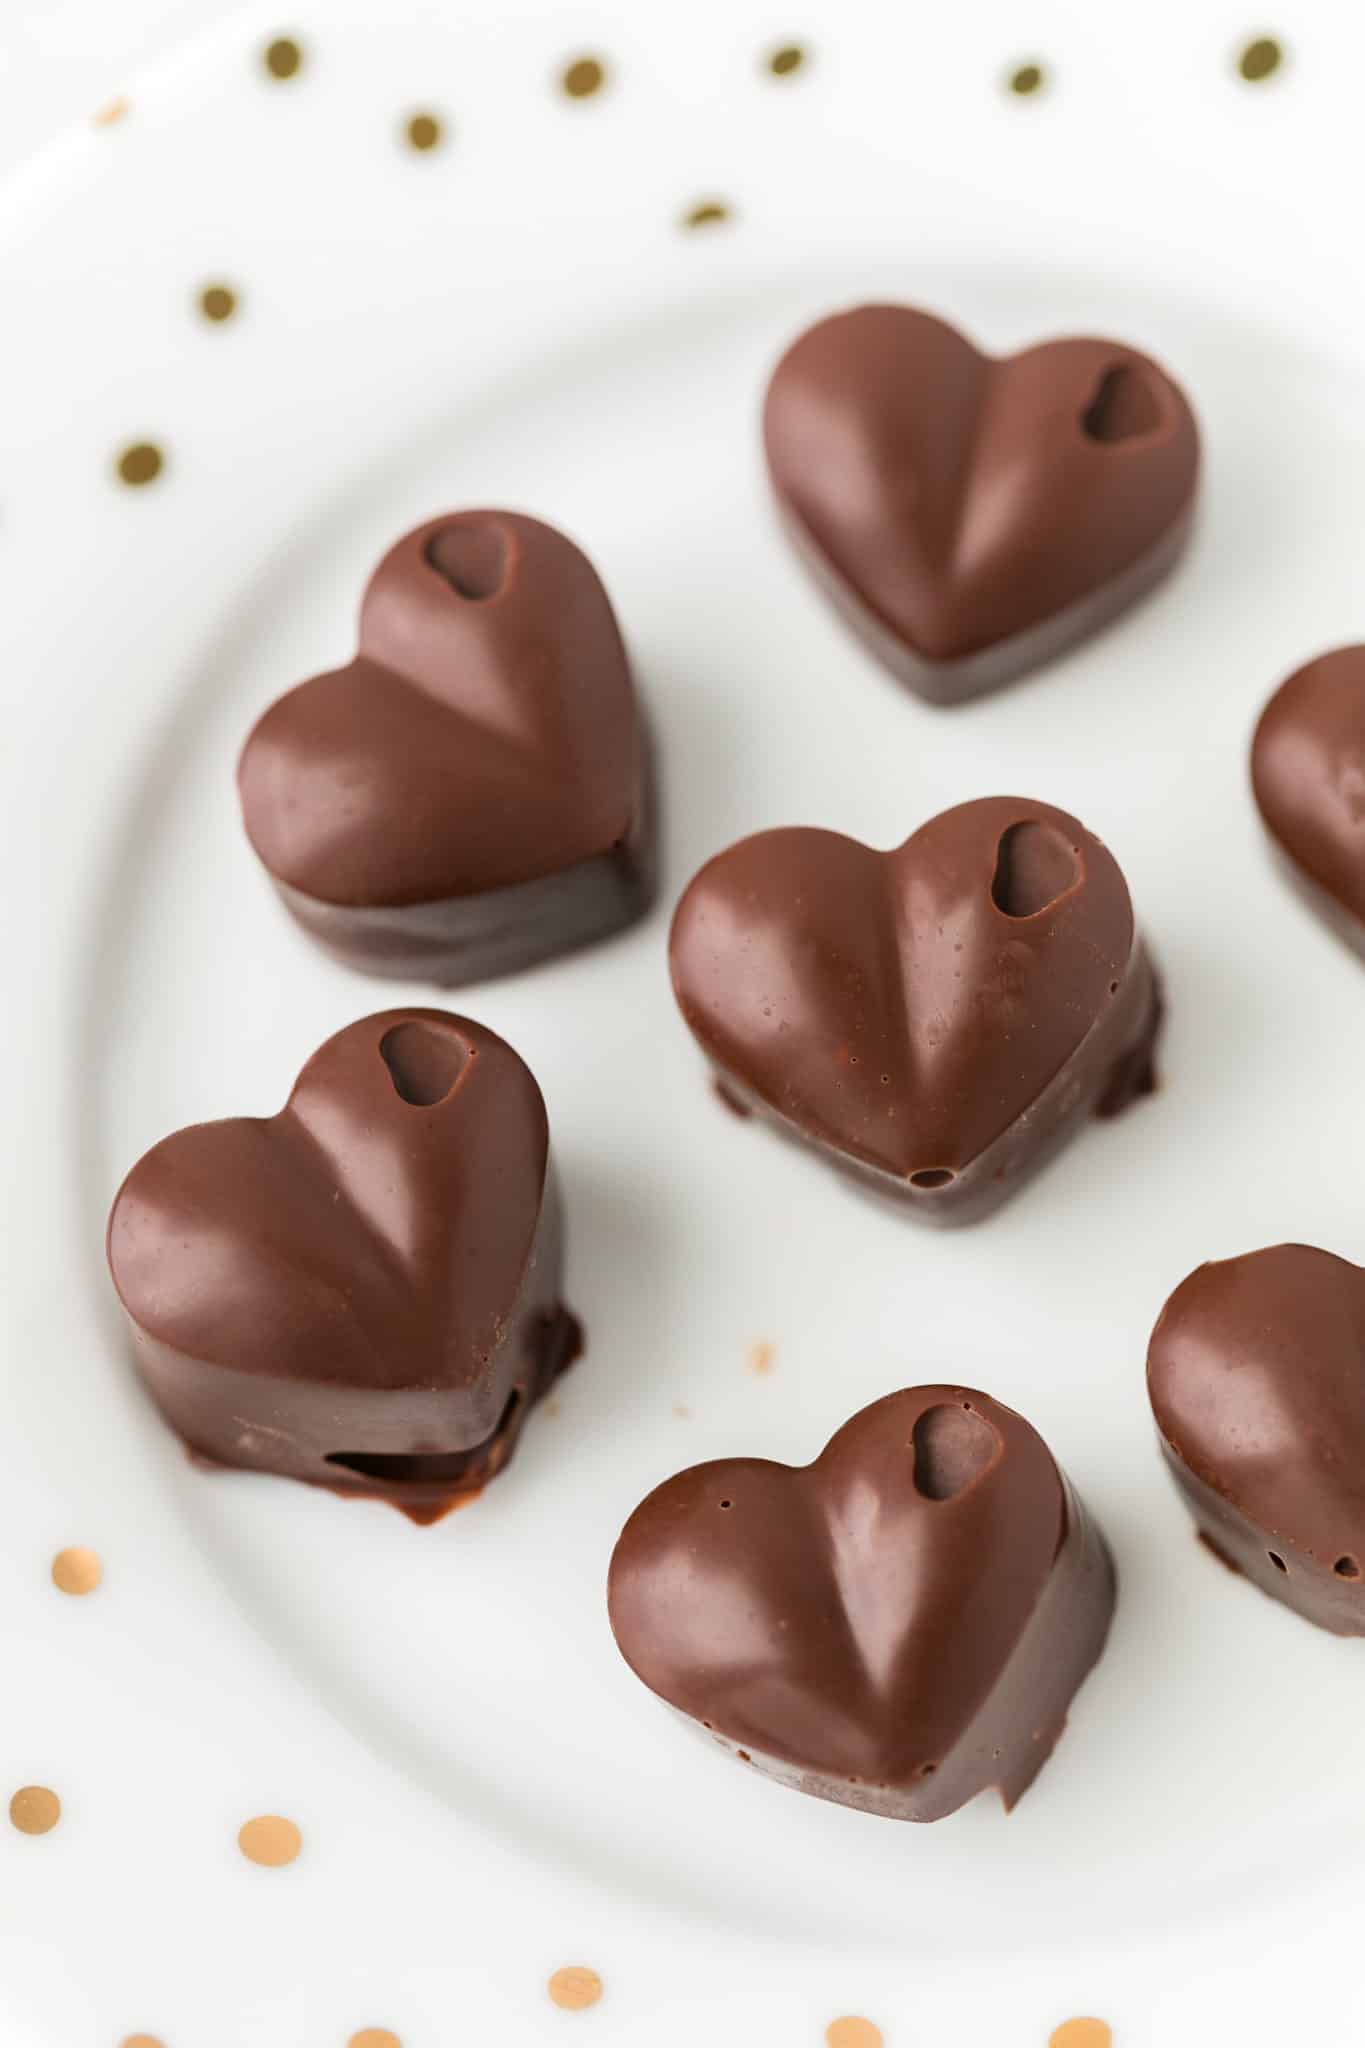 homemade chocolate hearts served on a white plate